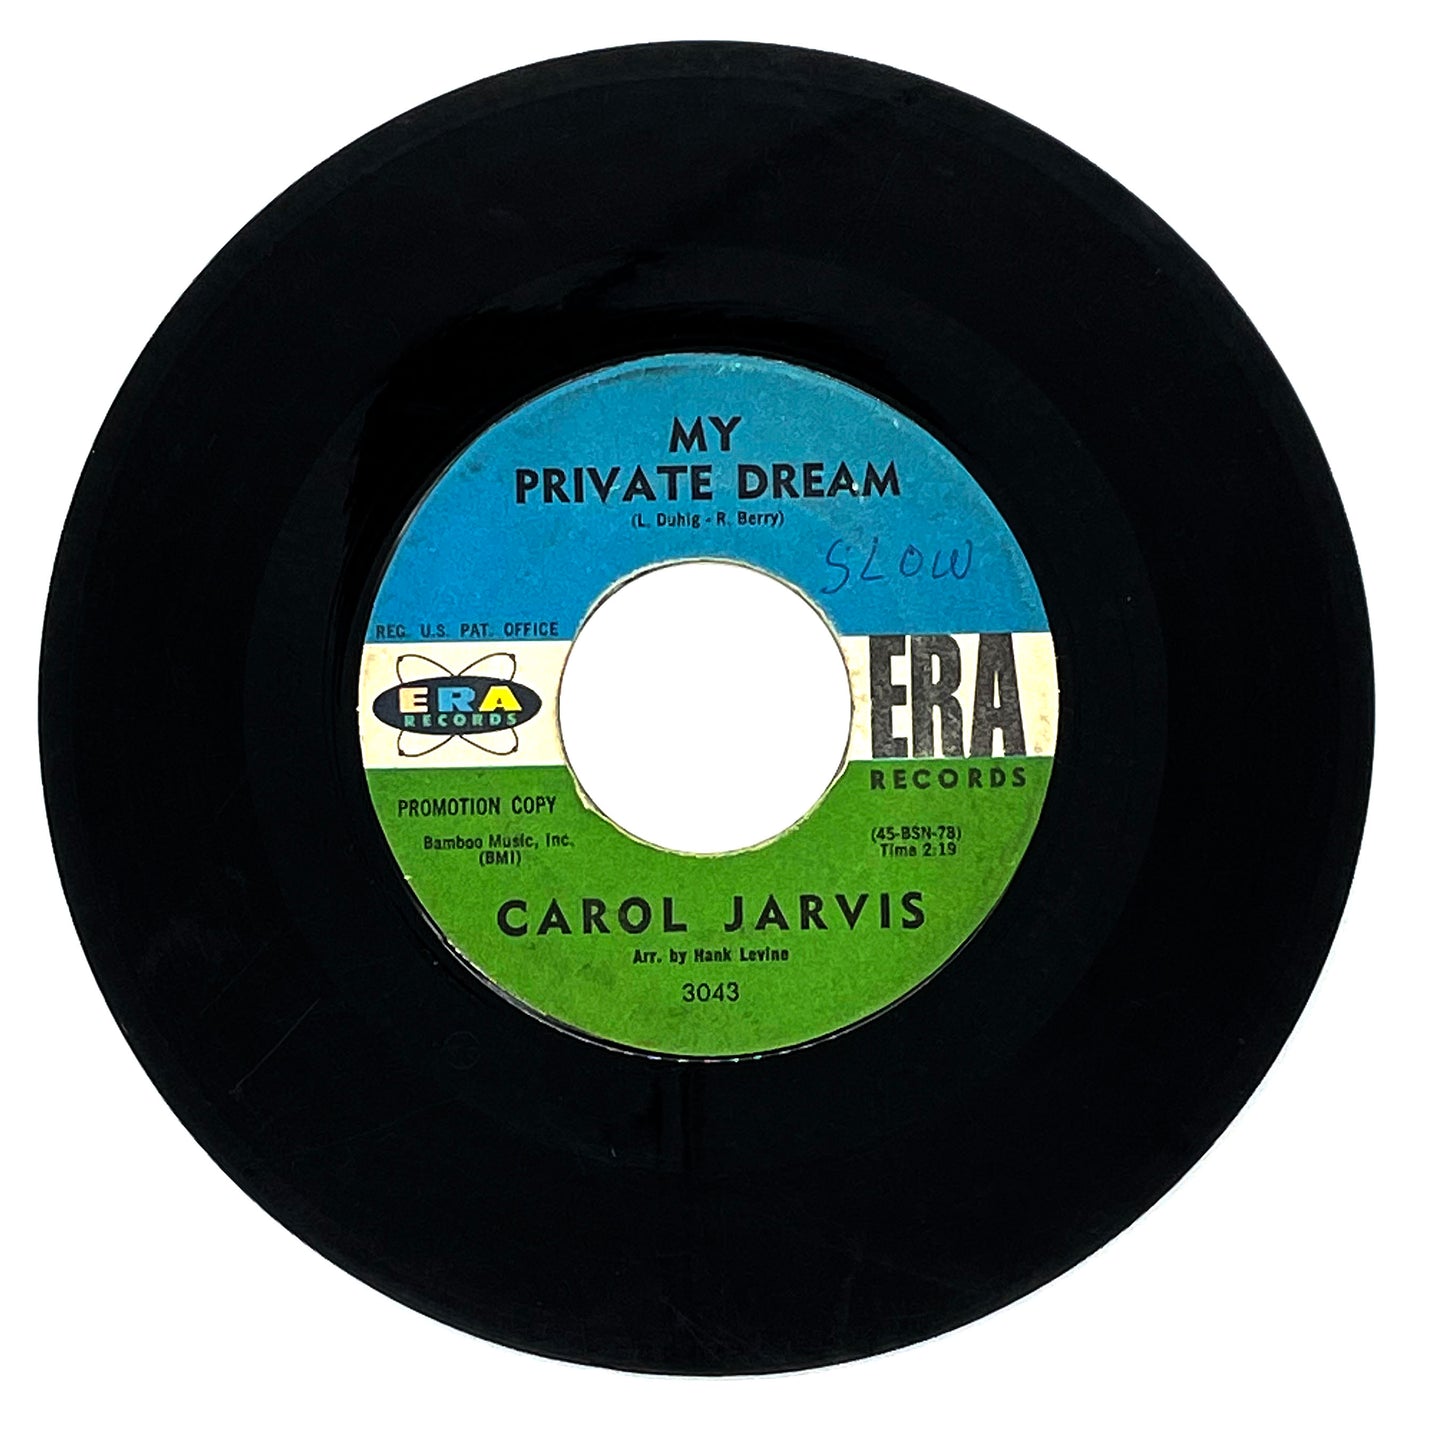 Carol Jarvis : MY PRIVATE DREAM/ GIVE HIM A KISS FOR ME